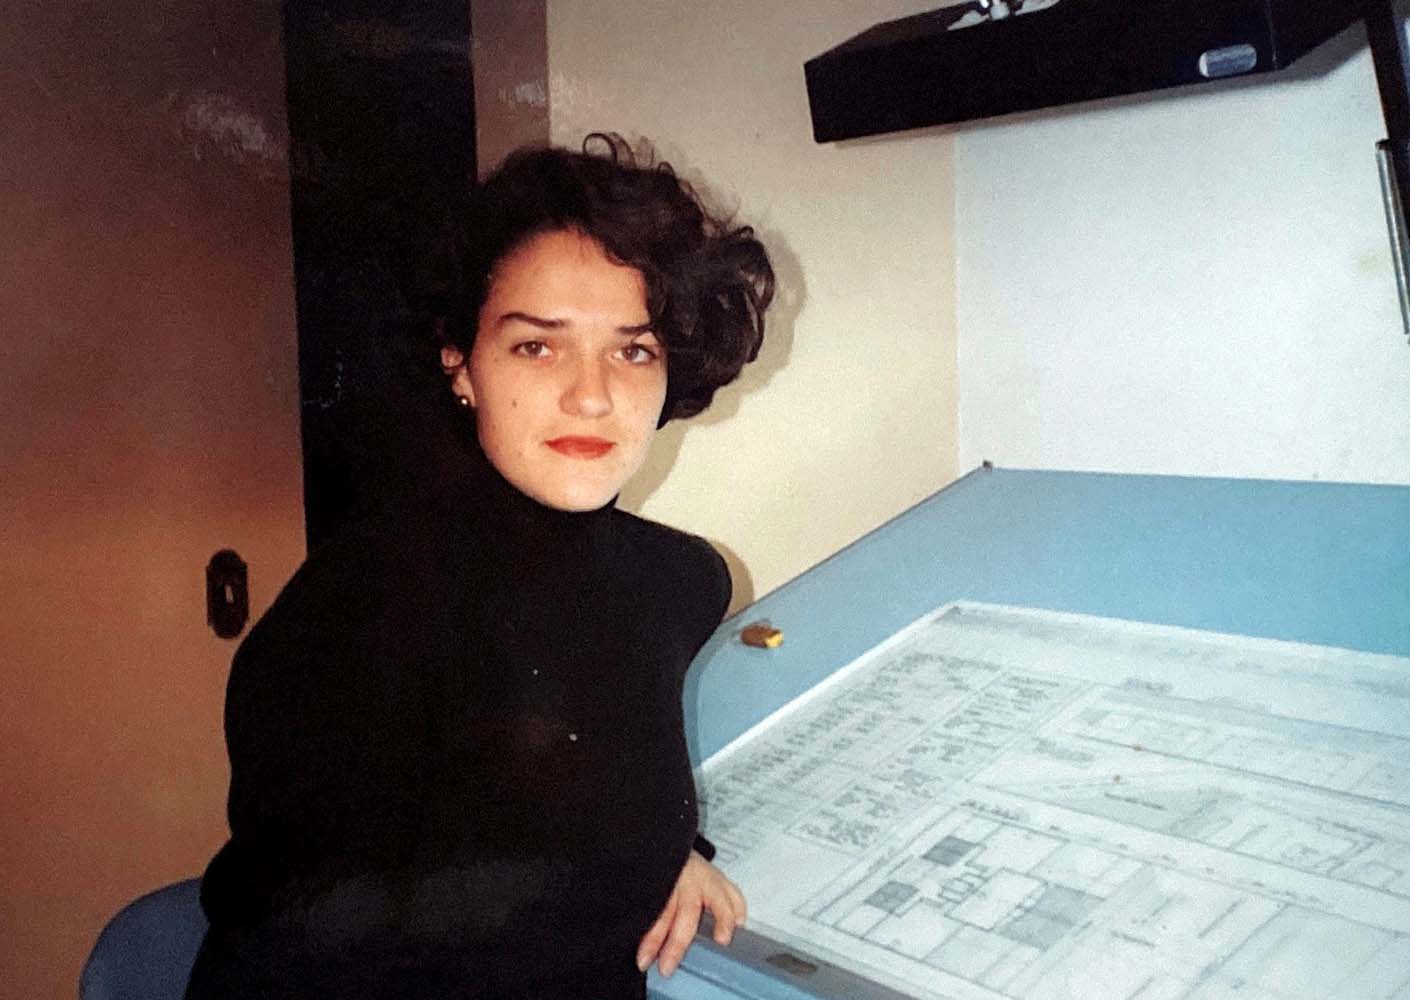 Laura sits at a drafting table as a young designer